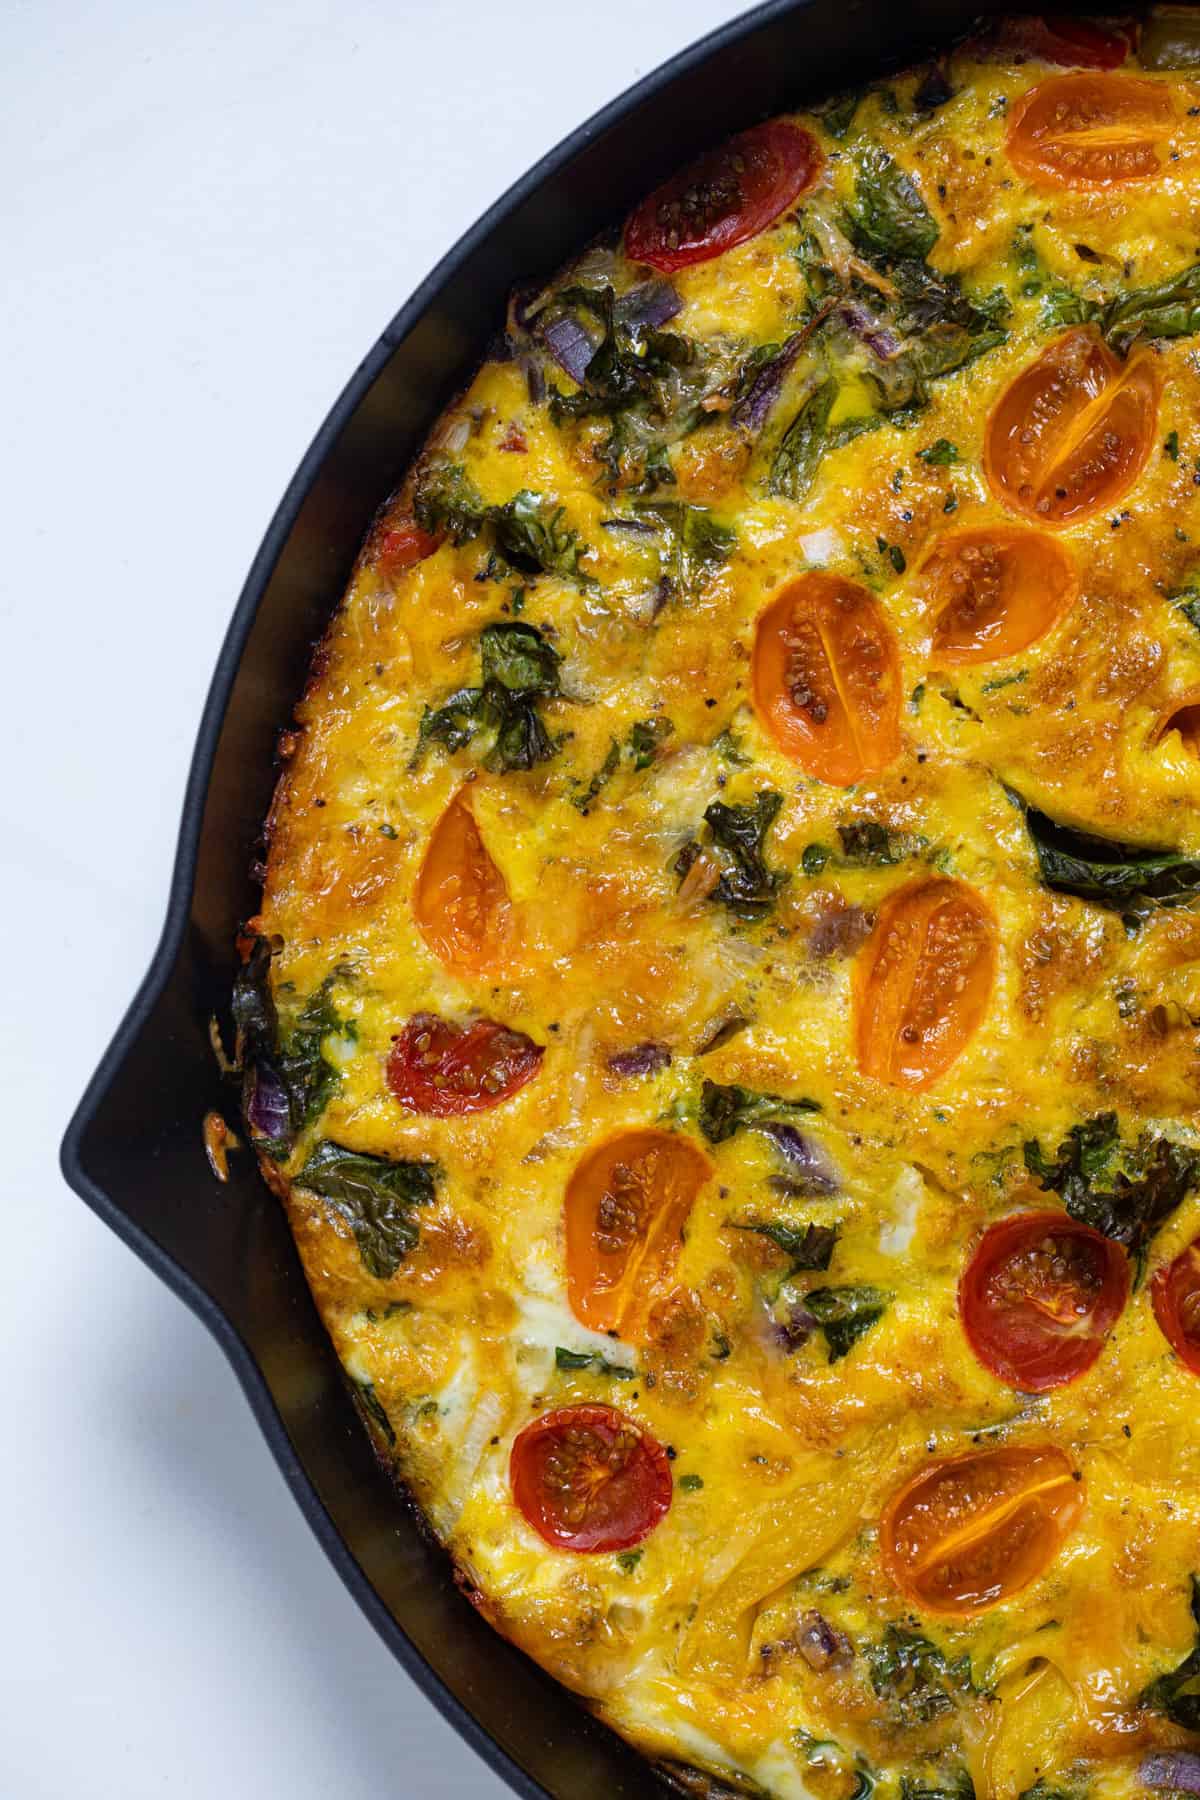 https://www.orchidsandsweettea.com/wp-content/uploads/2020/04/Fritata-4-of-7-scaled.jpg